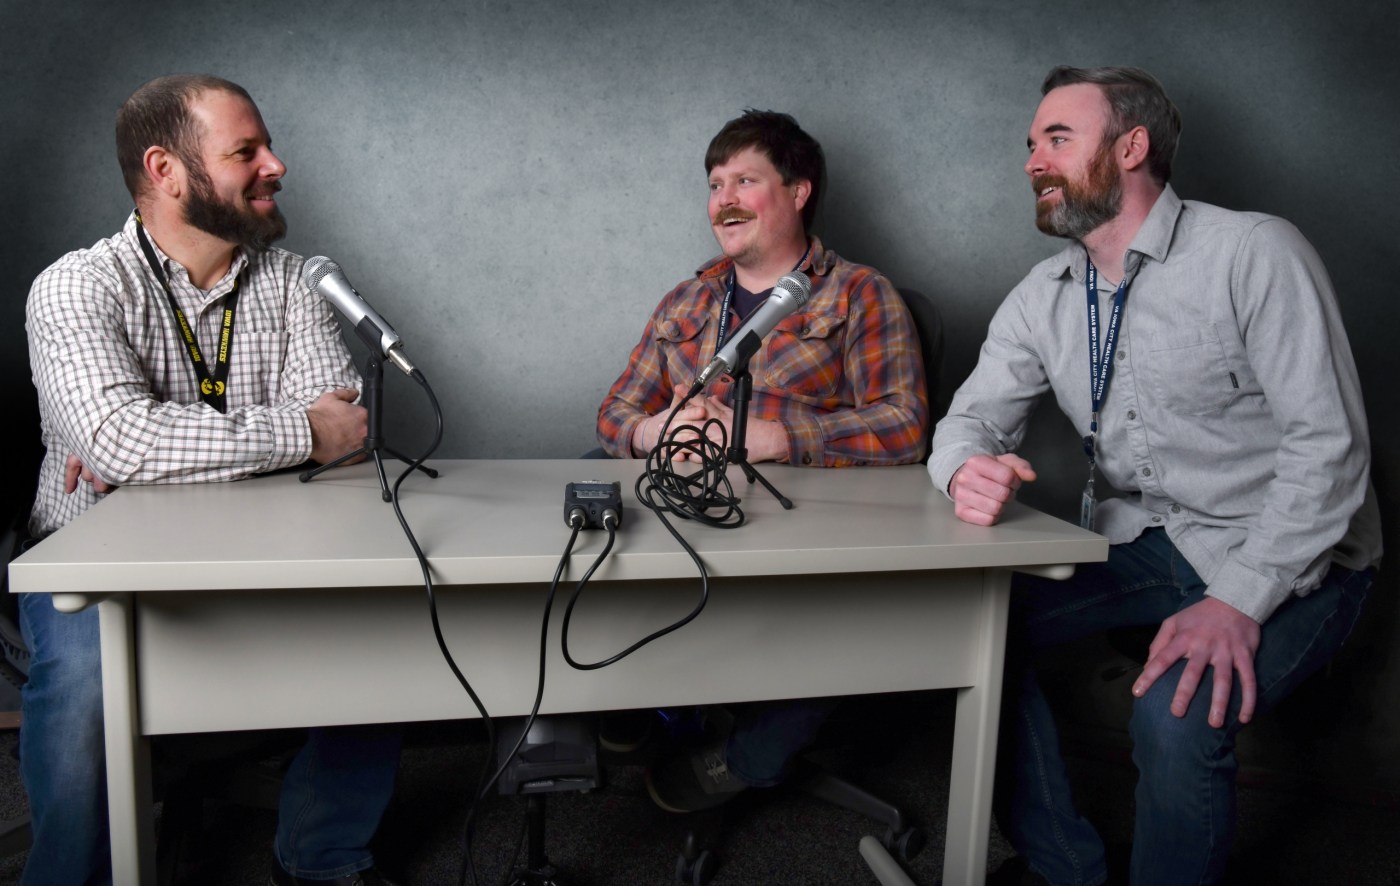 Veterans share their stories on a VA podcast that emphasizes the importance of research